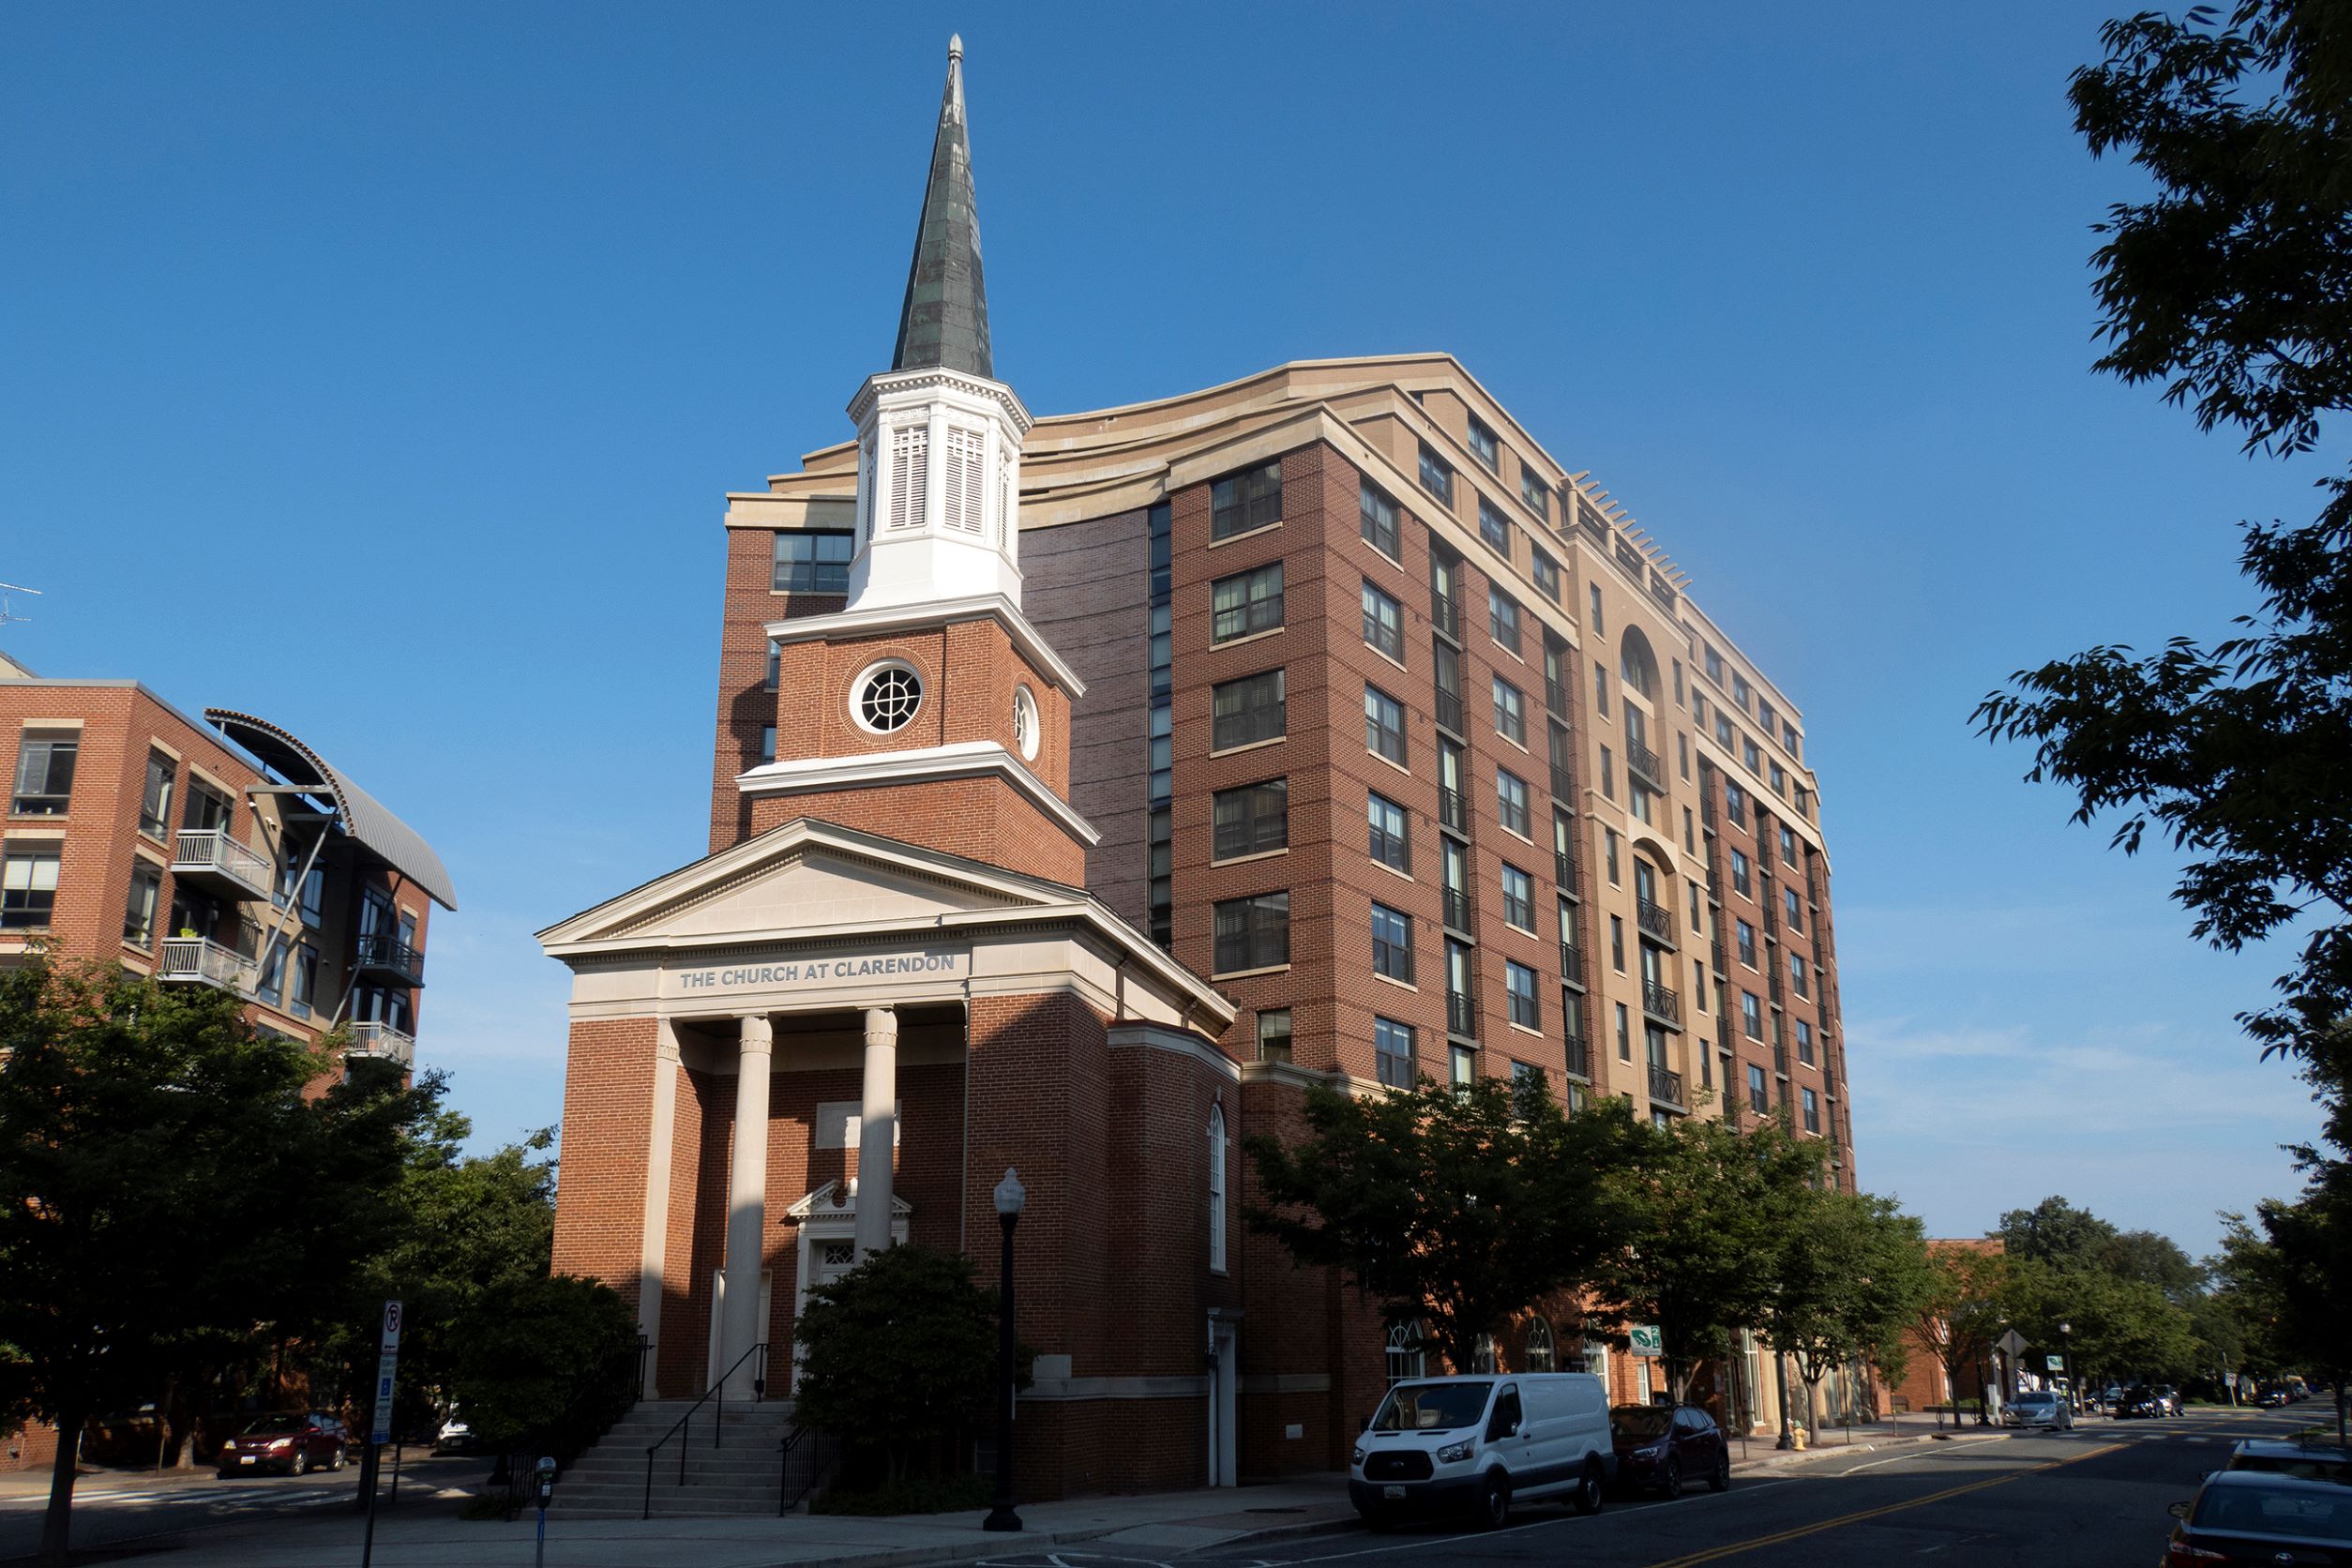 Image of the repurposed church space - affordable housing makes up the majority of the building, and a traditional church front and steeple make up the front of the building